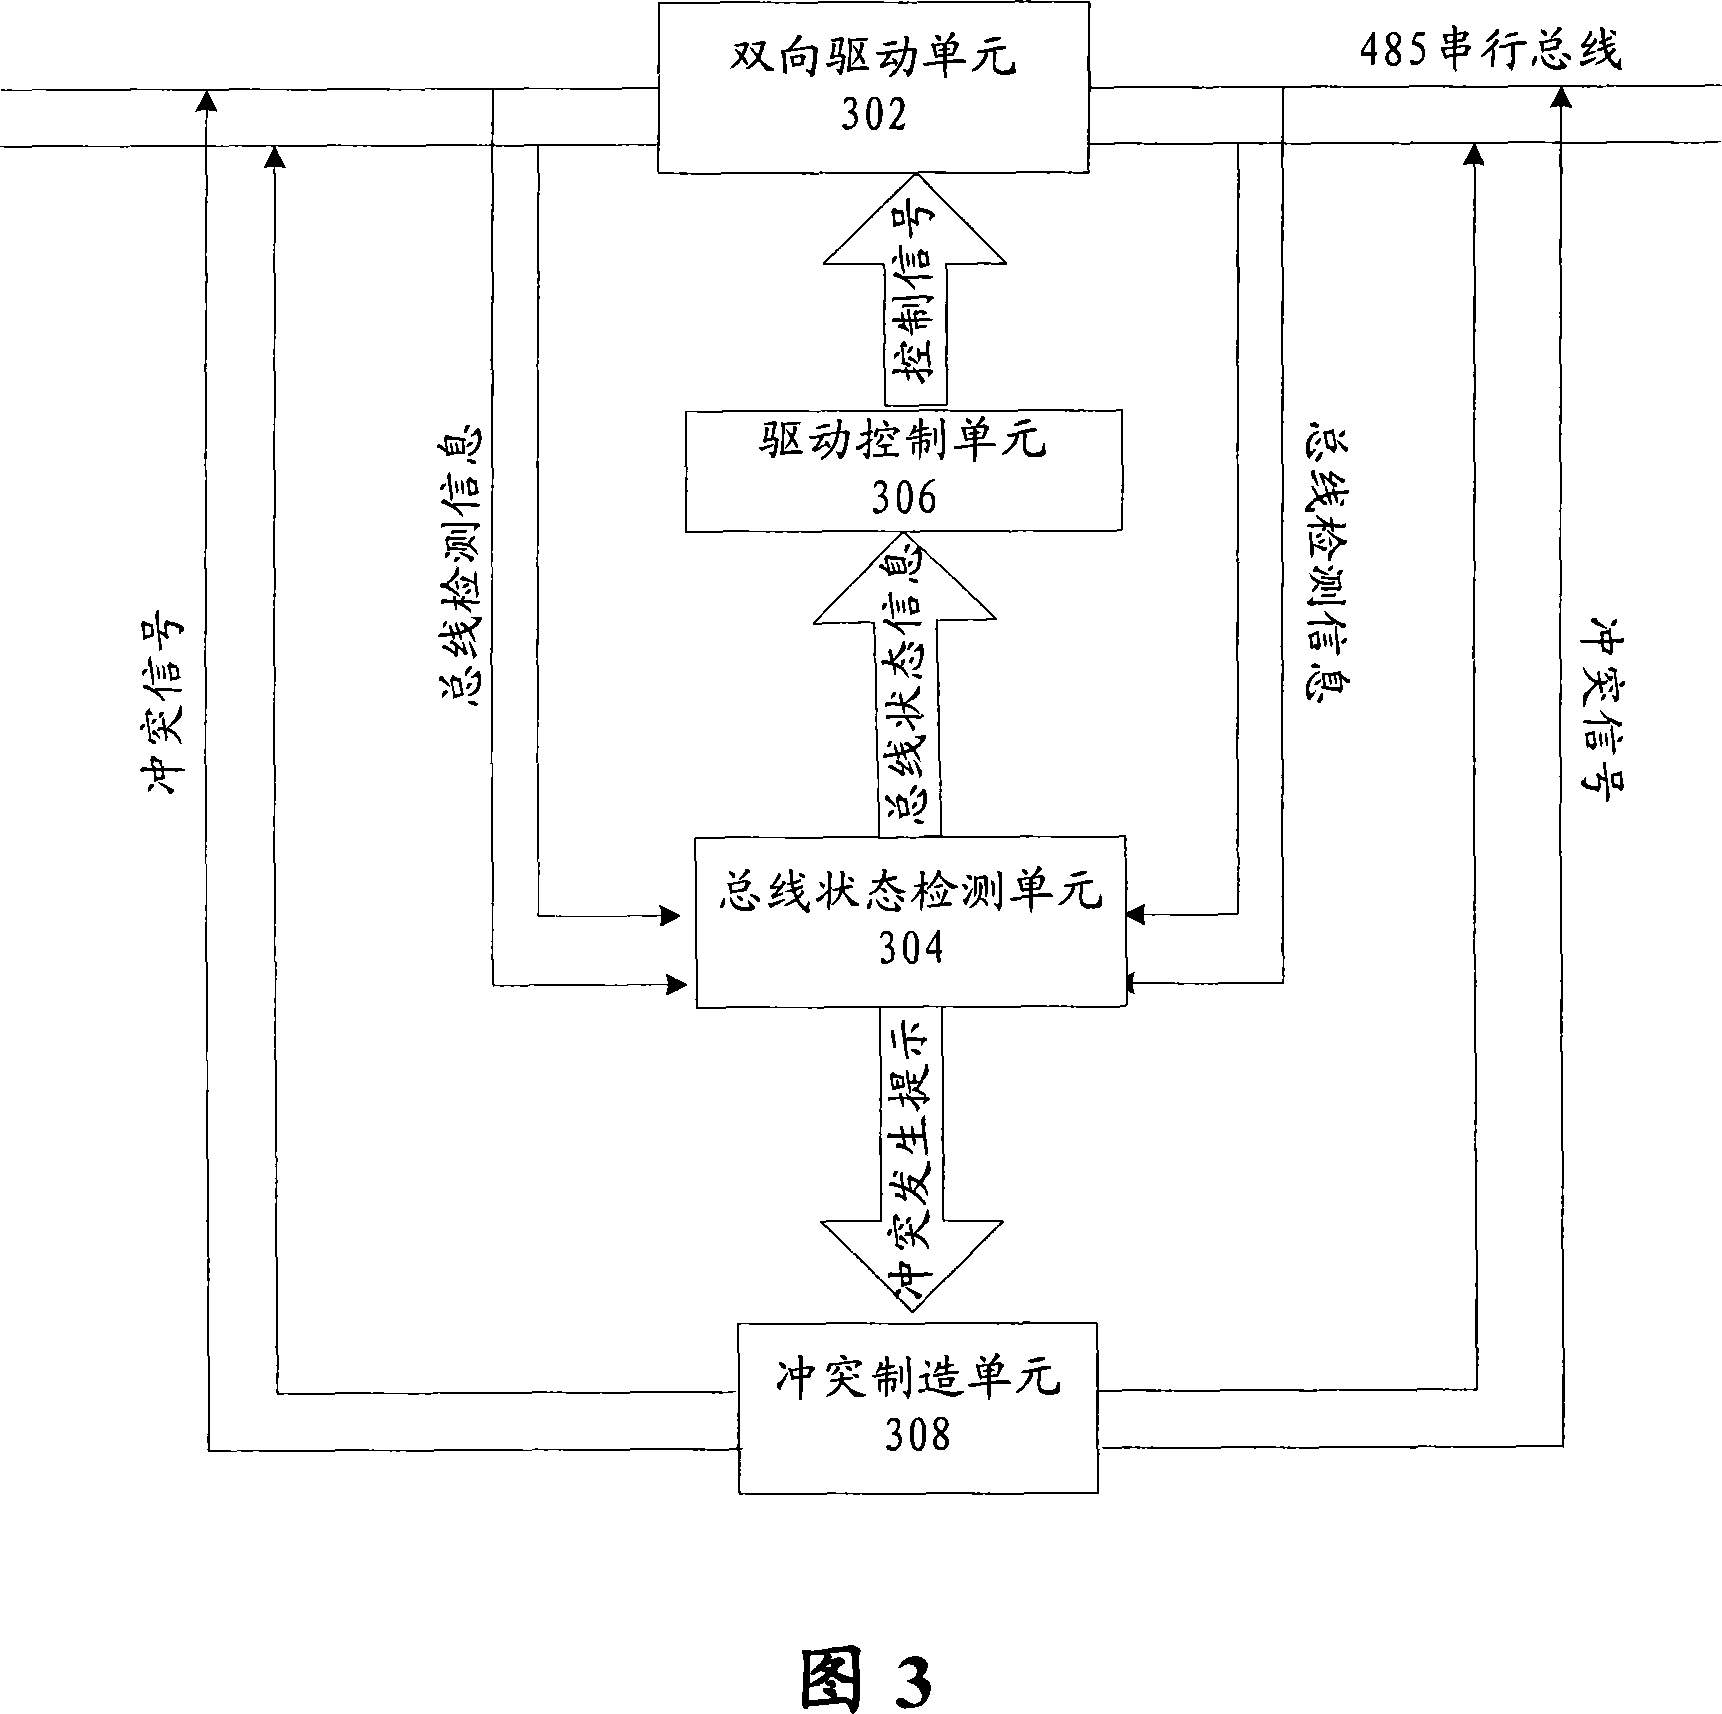 Bus relay device